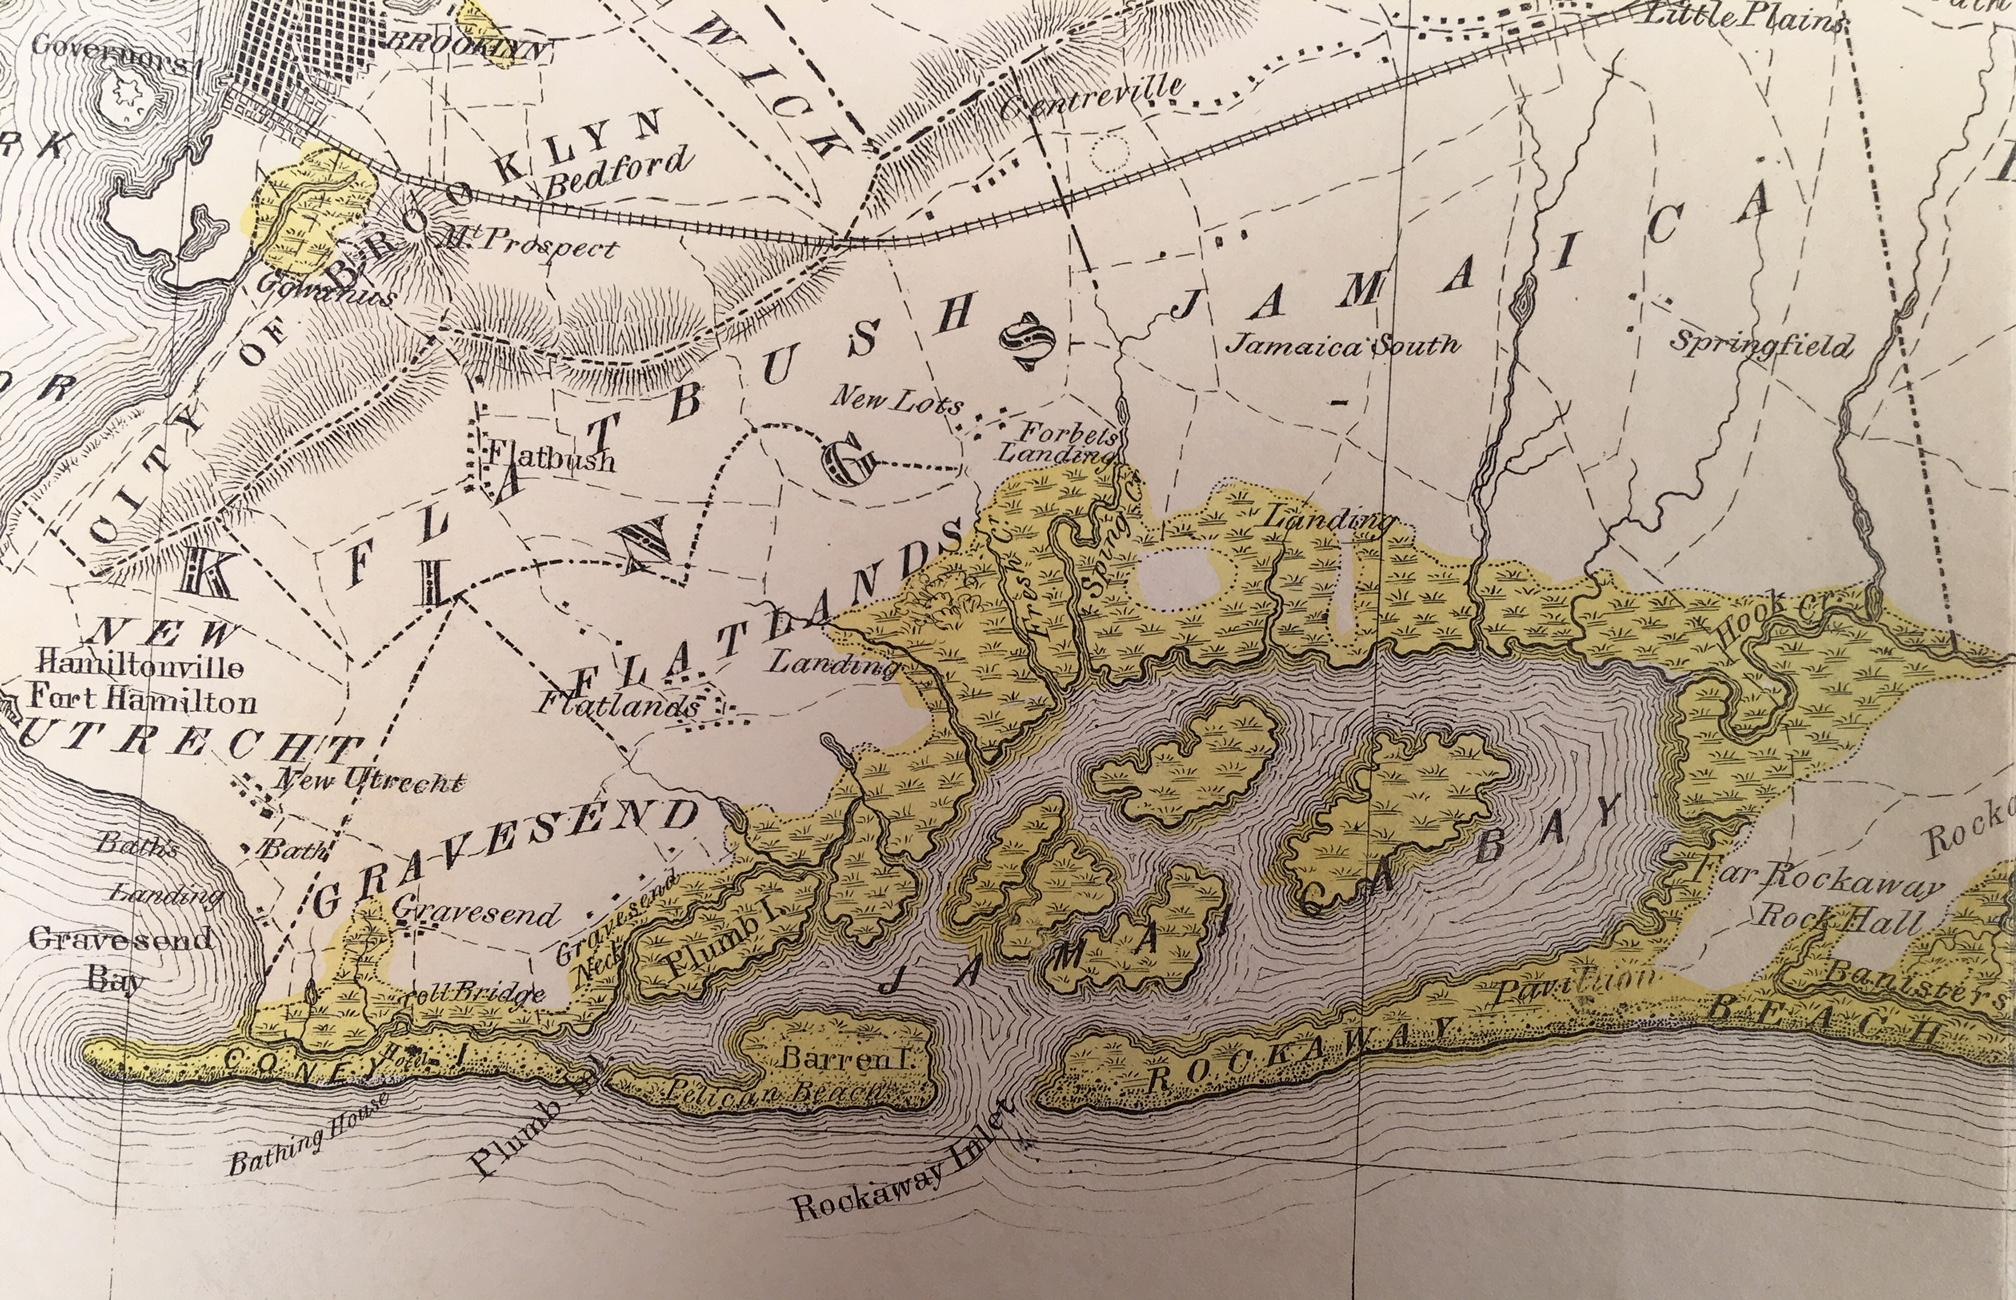 Published in 1842 prior to the American Civil War and the subsequent Long Island land rush, this is one of the most detailed and attractive large format maps of Long Island to appear in the 19th Century. Covers from New Jersey and Staten Island